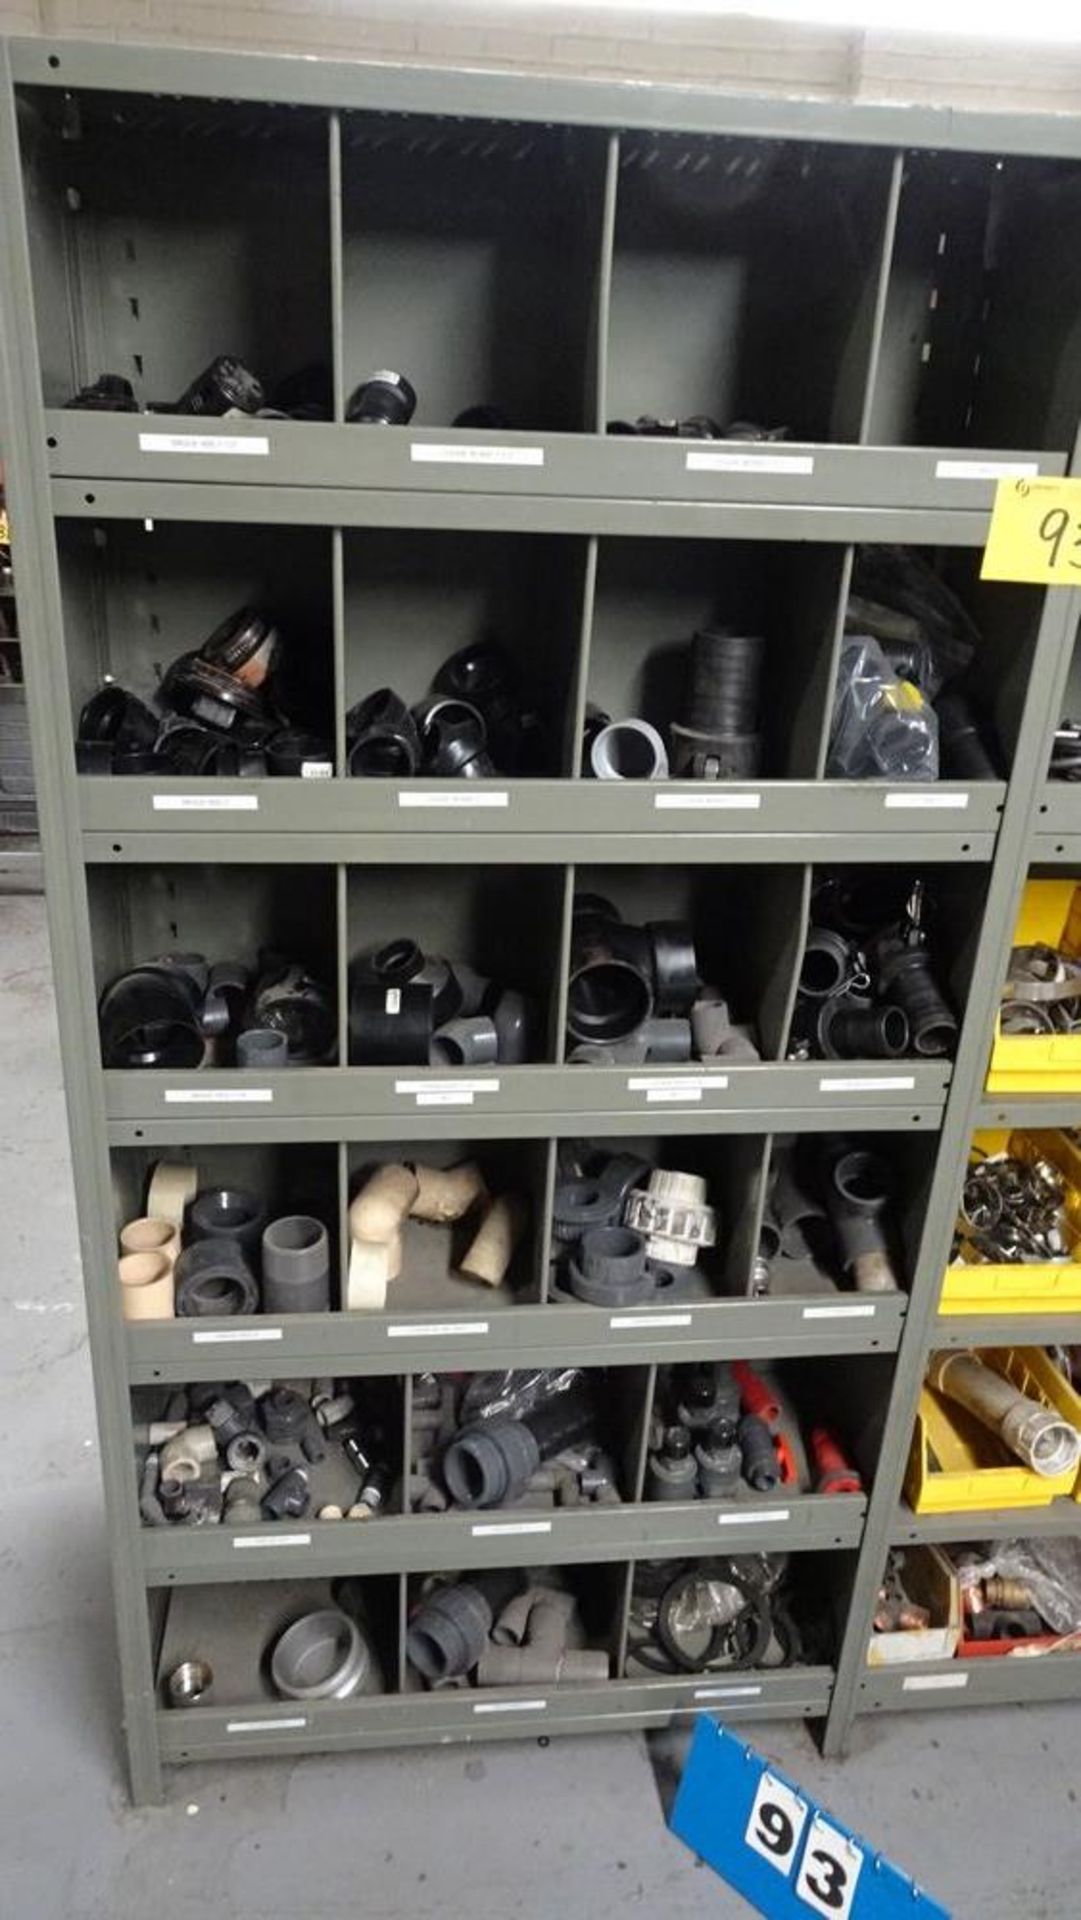 (2) SECTIONS SNAP SHELVING C/W ASSORTED PIPE FITTINGS & BINS - Image 2 of 3